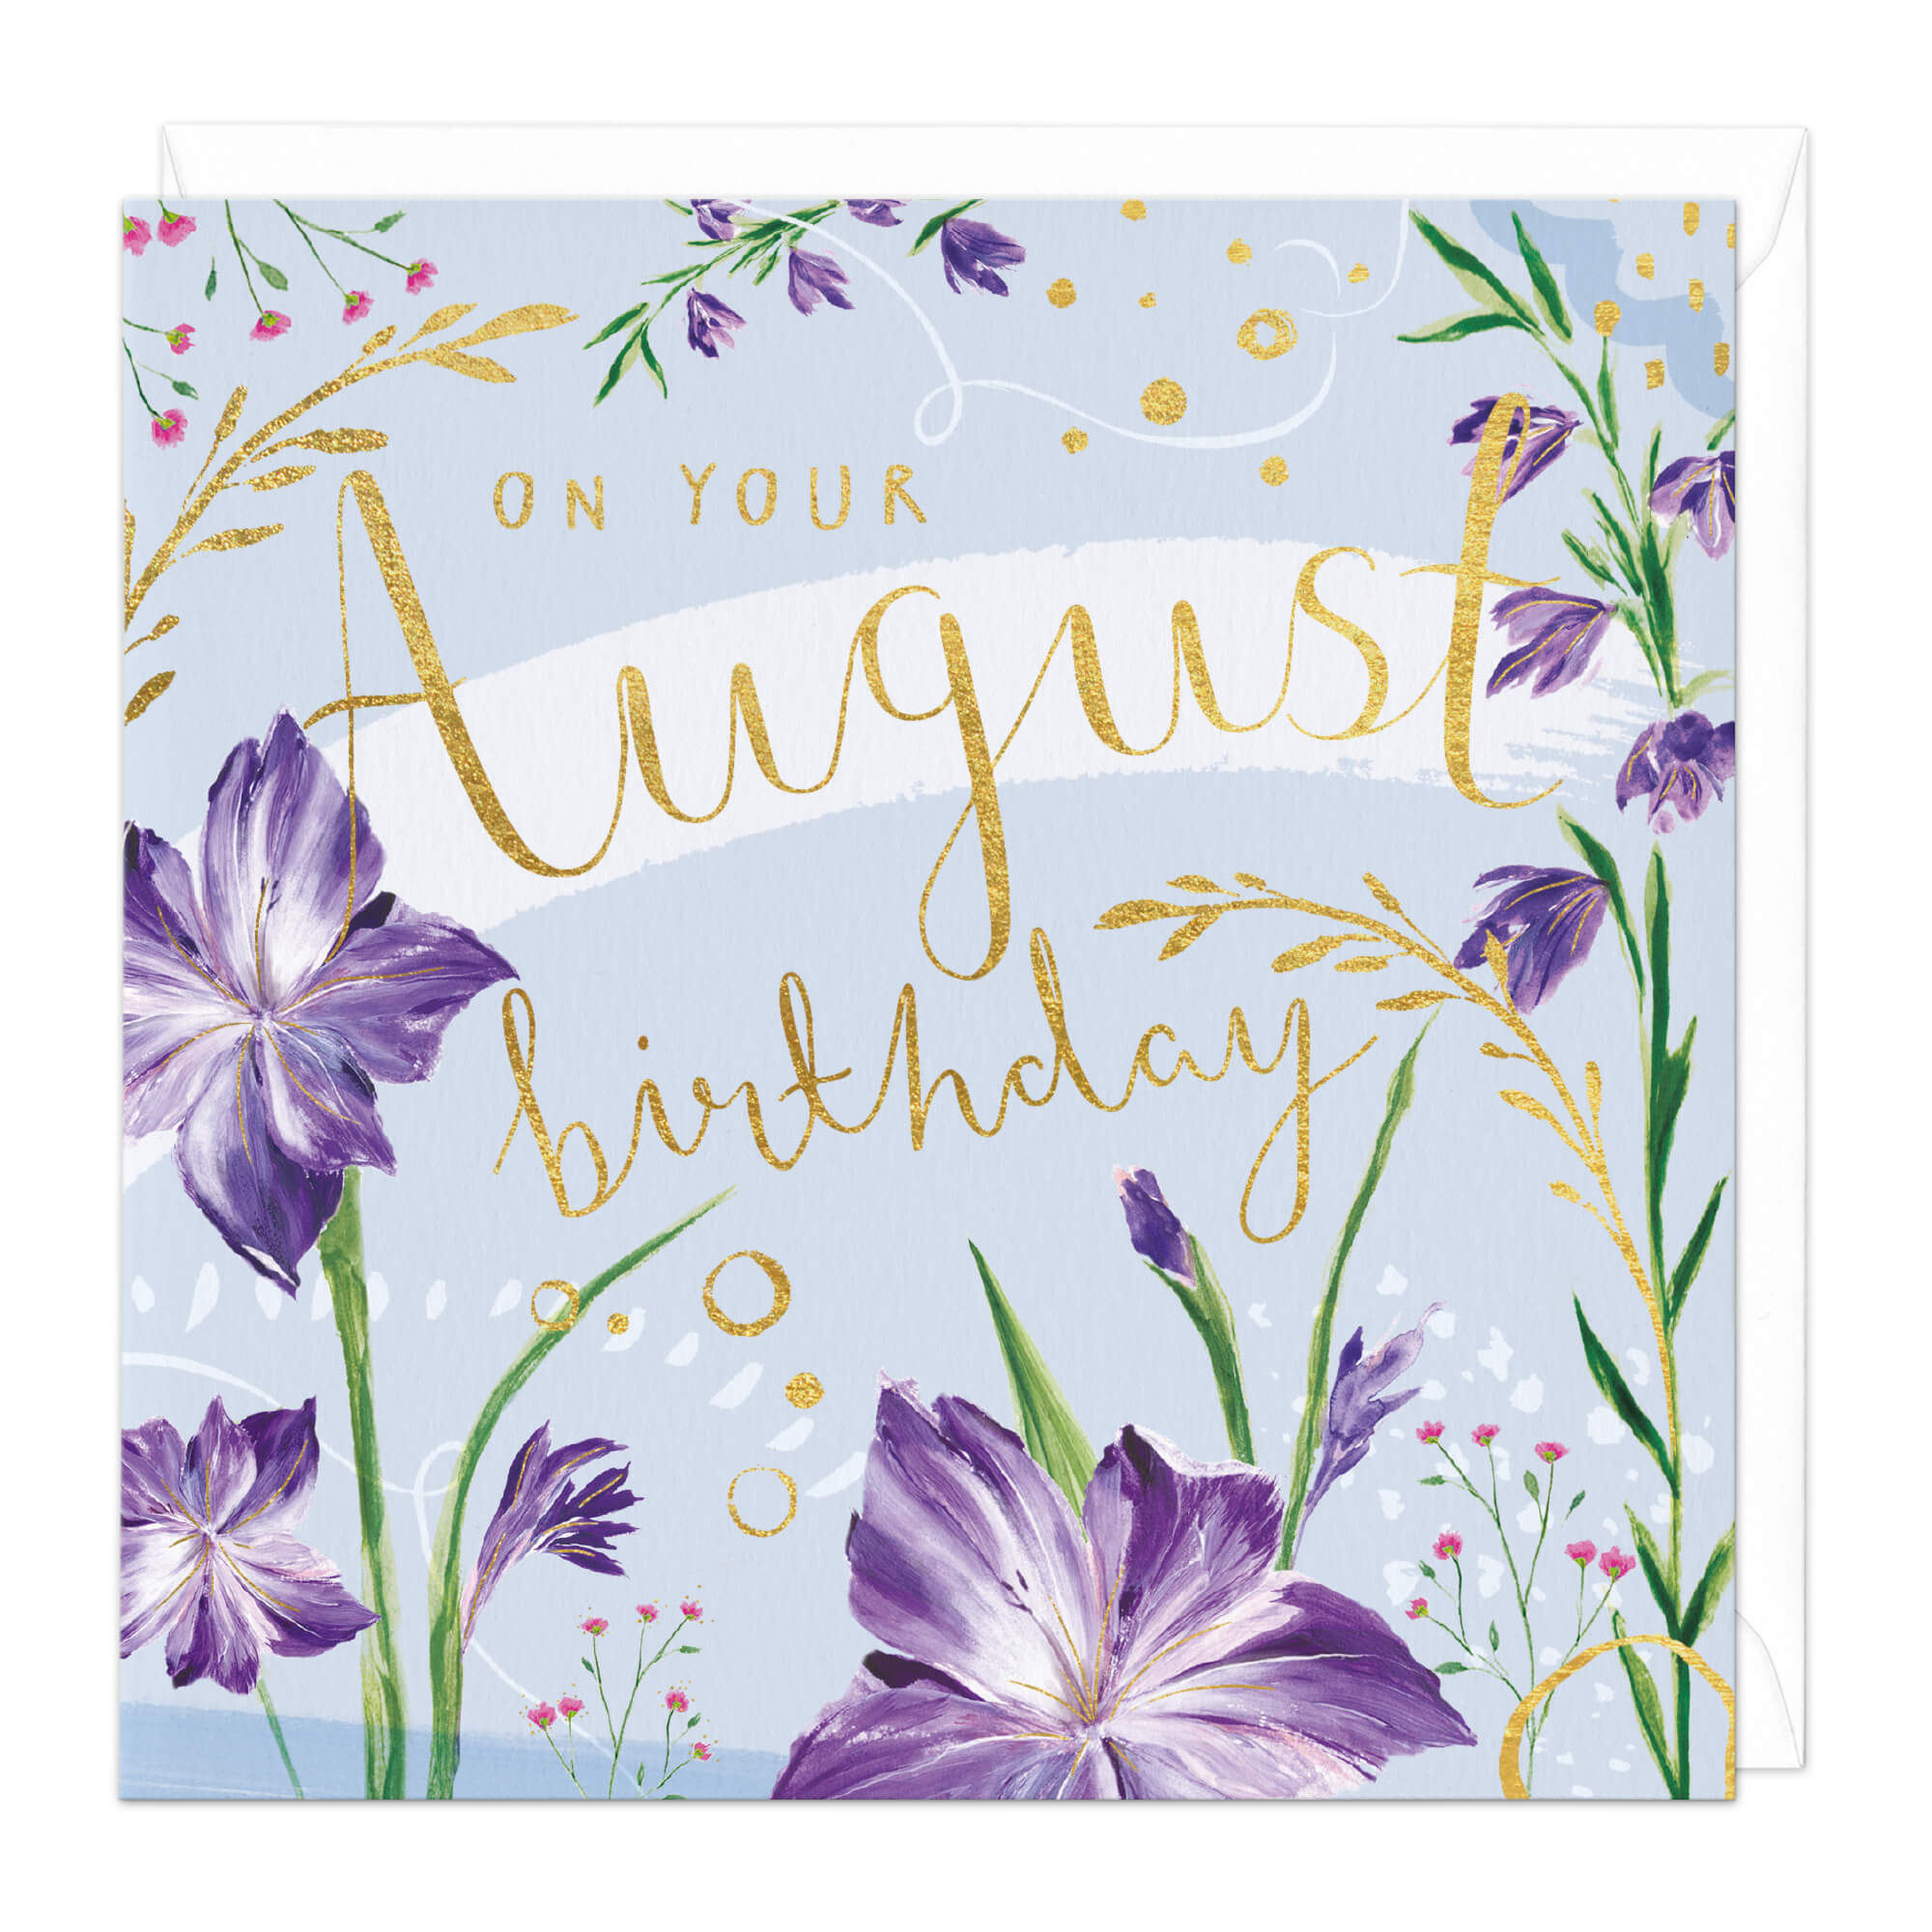 On Your August Birthday Card